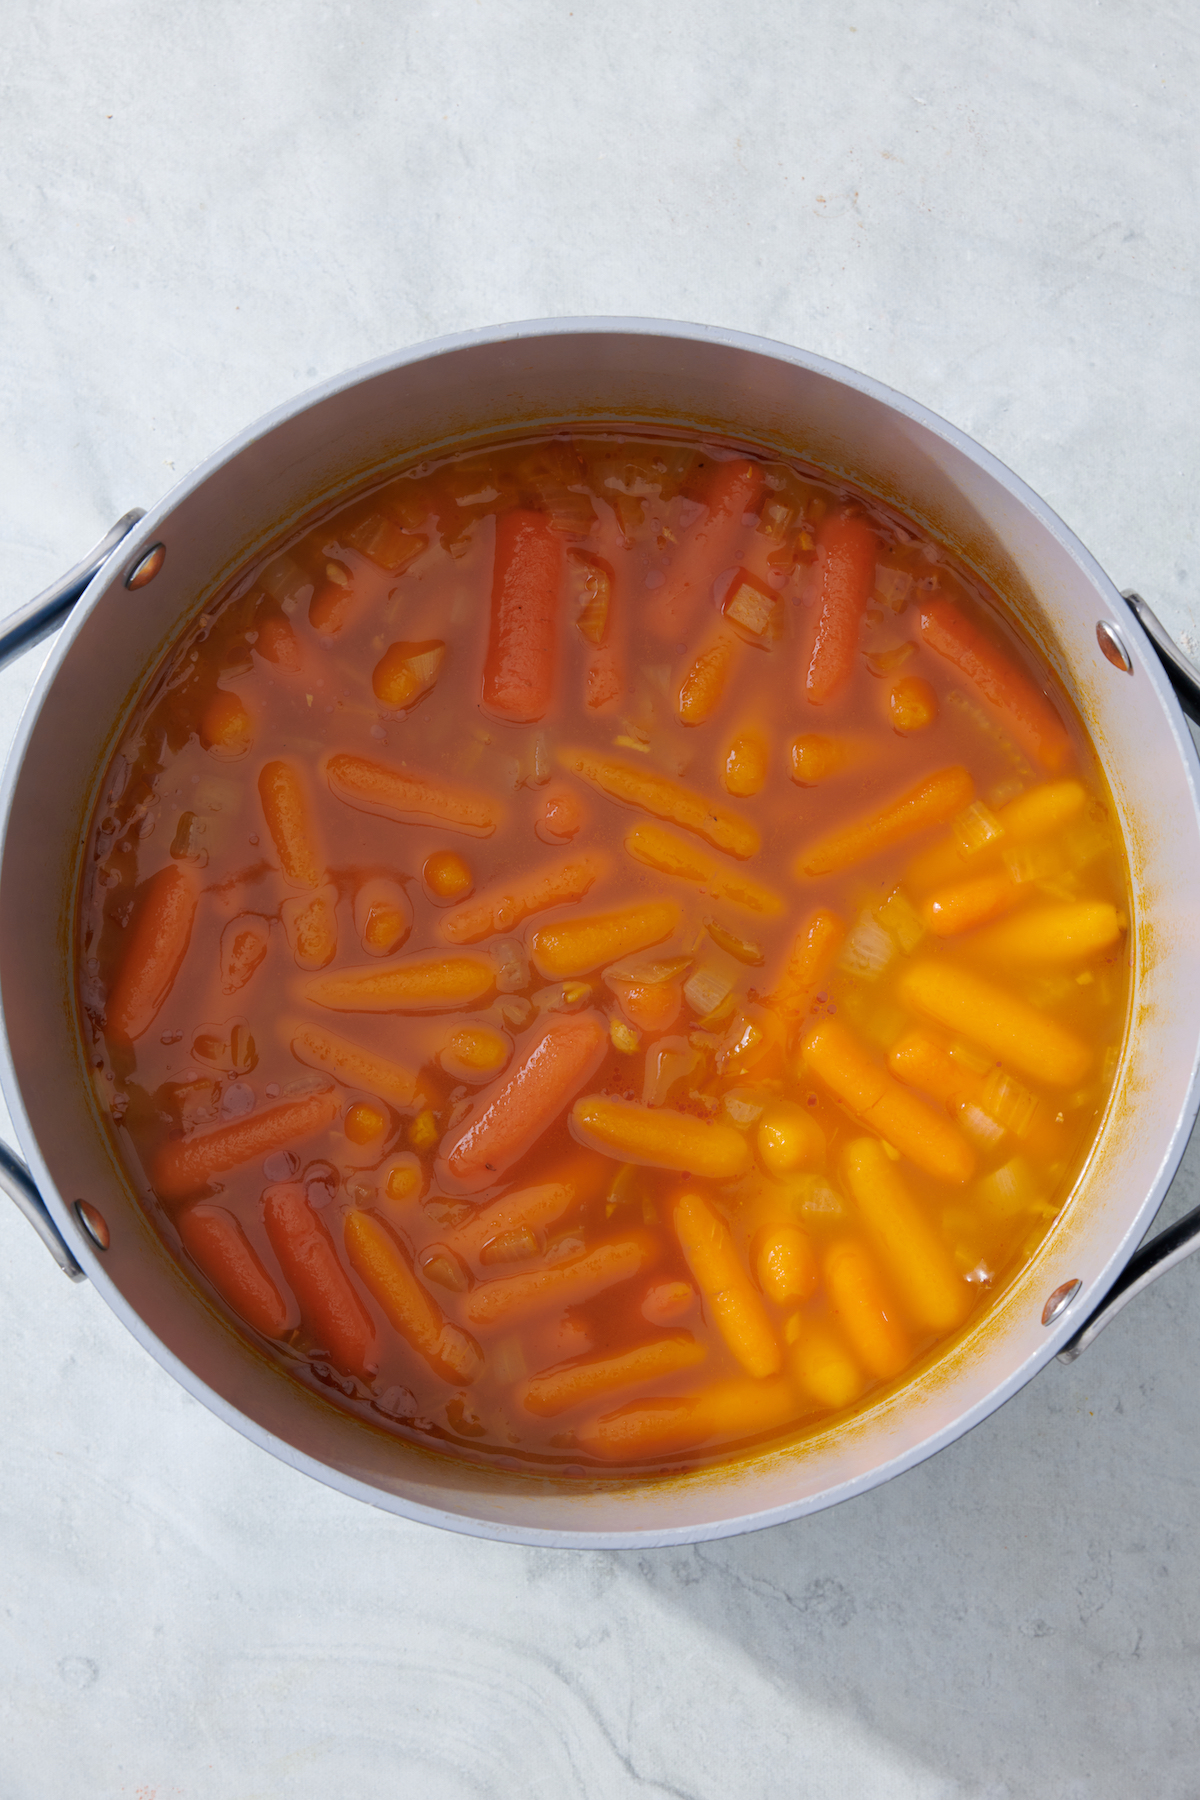 cooked carrots in vegetable broth